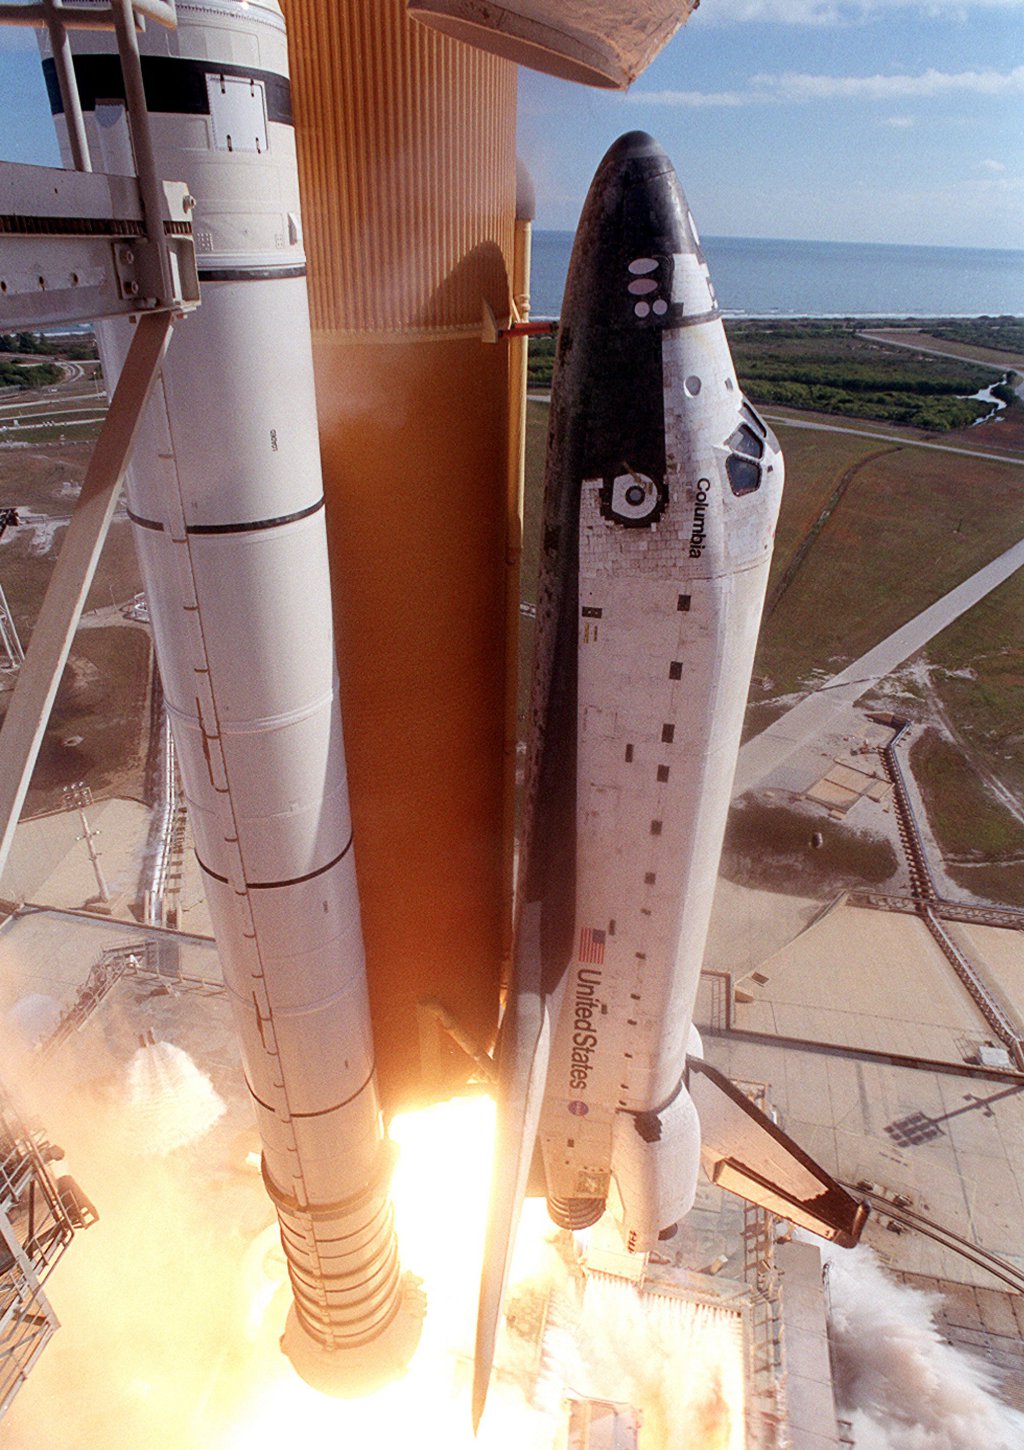 A close-up camera view shows Space Shuttle Columbia as it lifts off from Launch Pad 39A on mission STS-107.